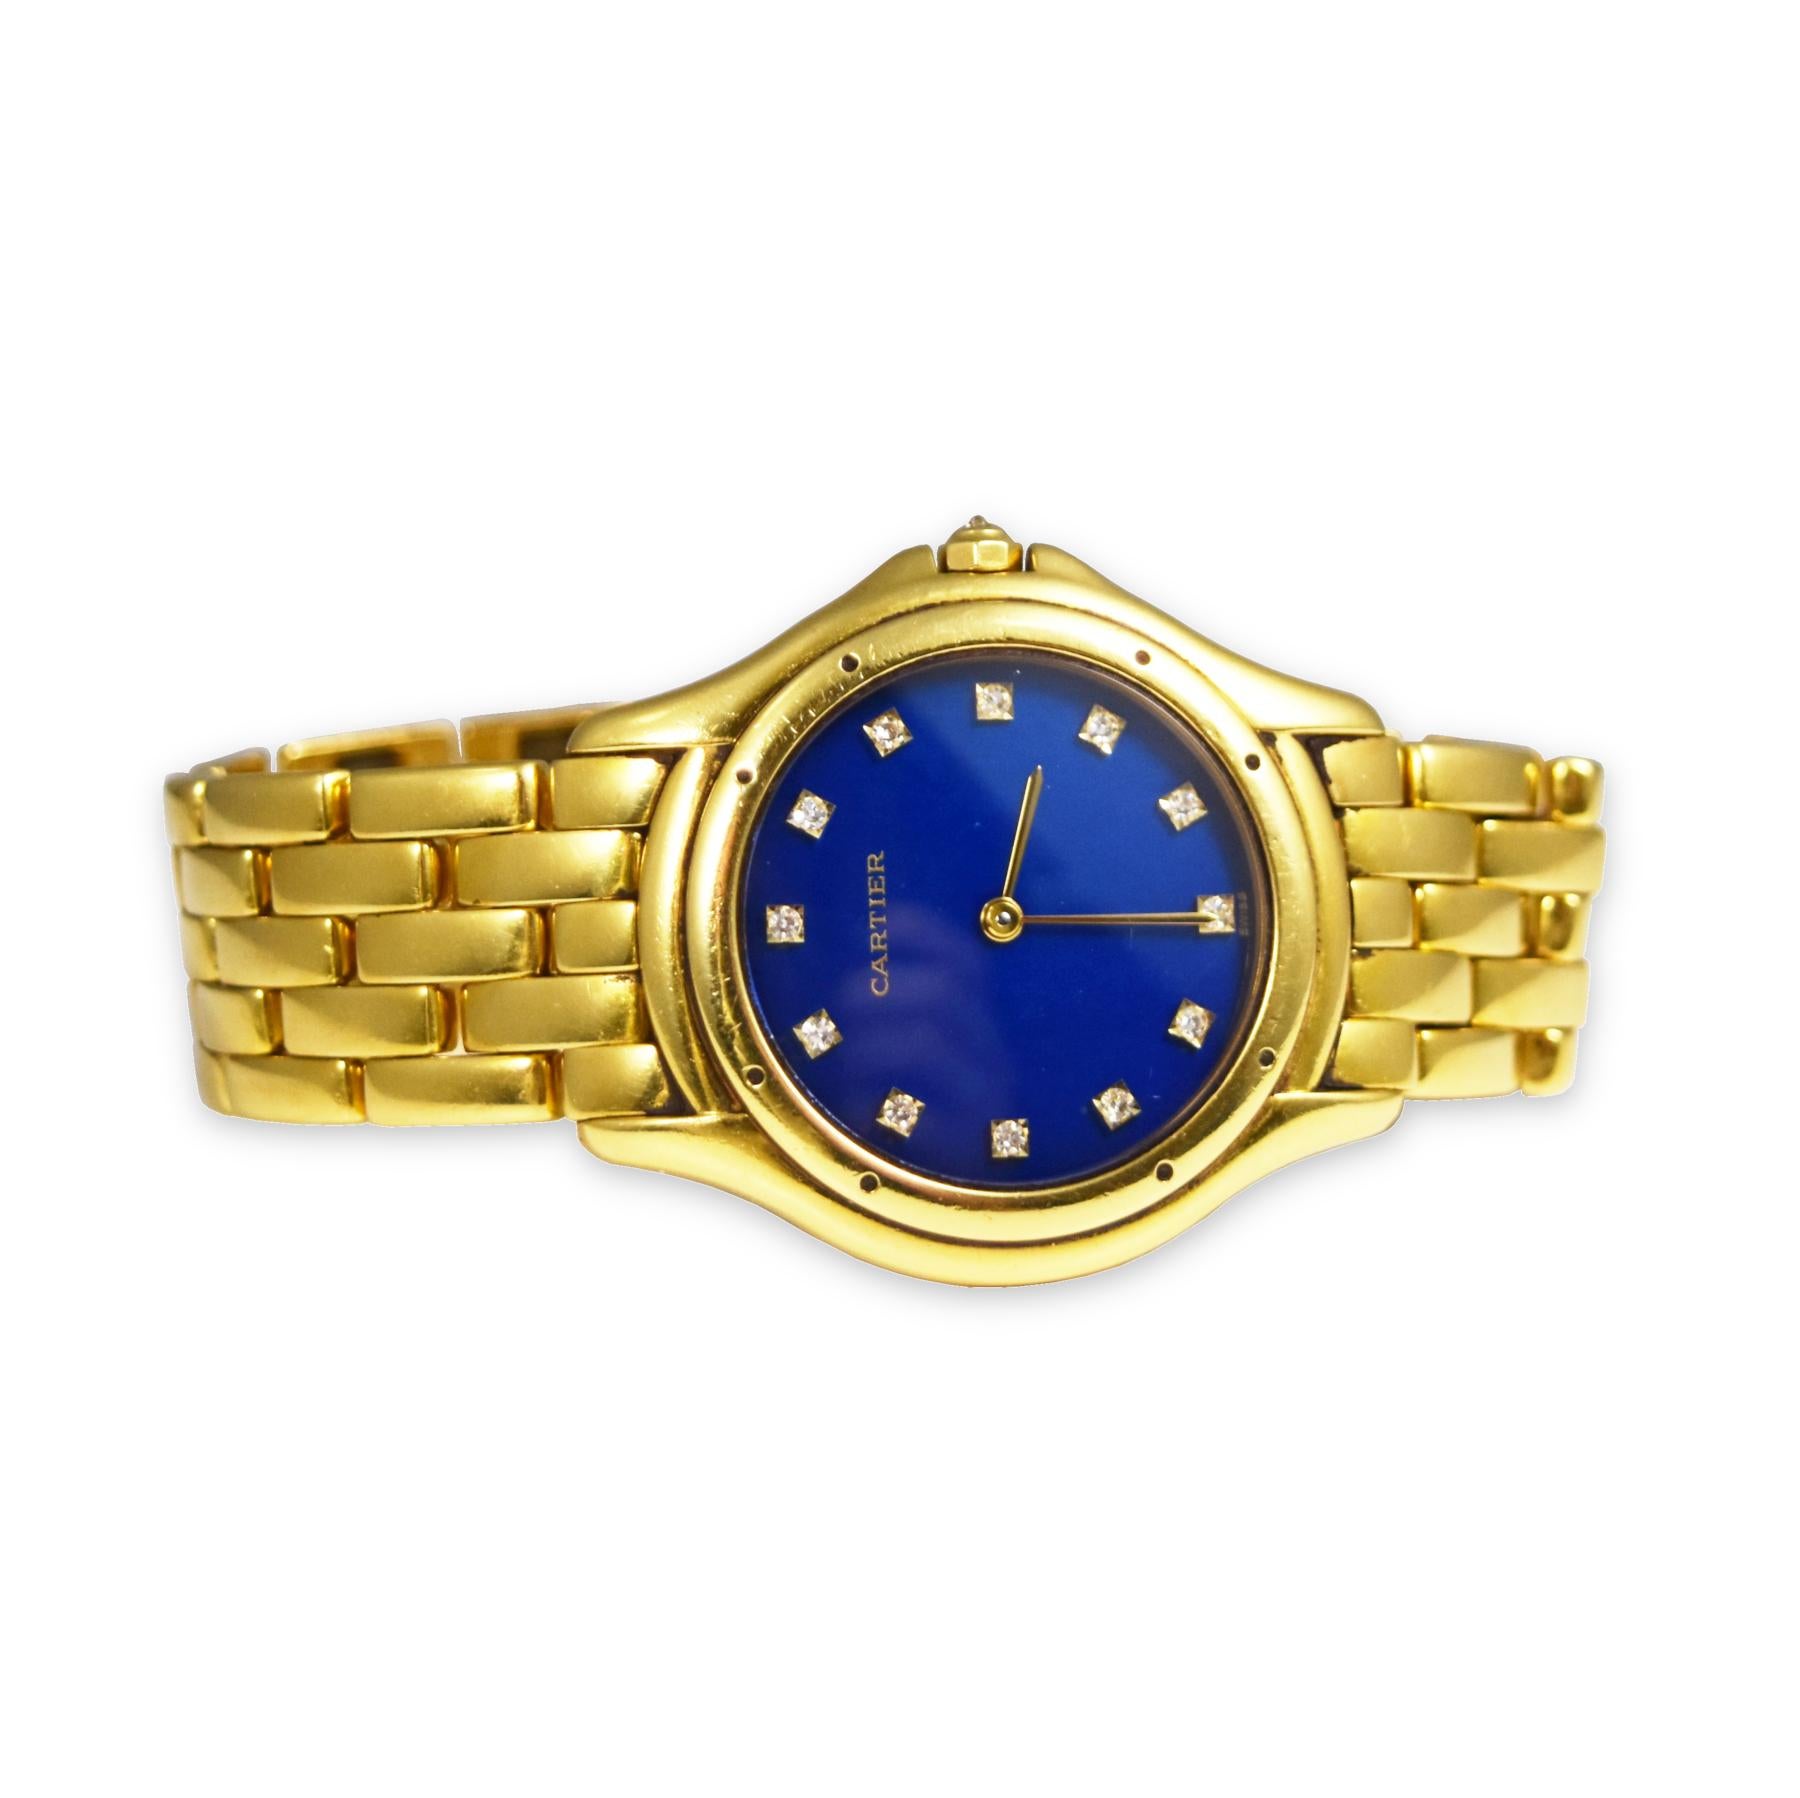 This lovely watch by Cartier features a contemporary, yet classic design with its round case in 18k yellow gold, an interesting variation of the best-seller Panthere watch. It is luxuriously adorned by diamonds on its stunning marine blue dial